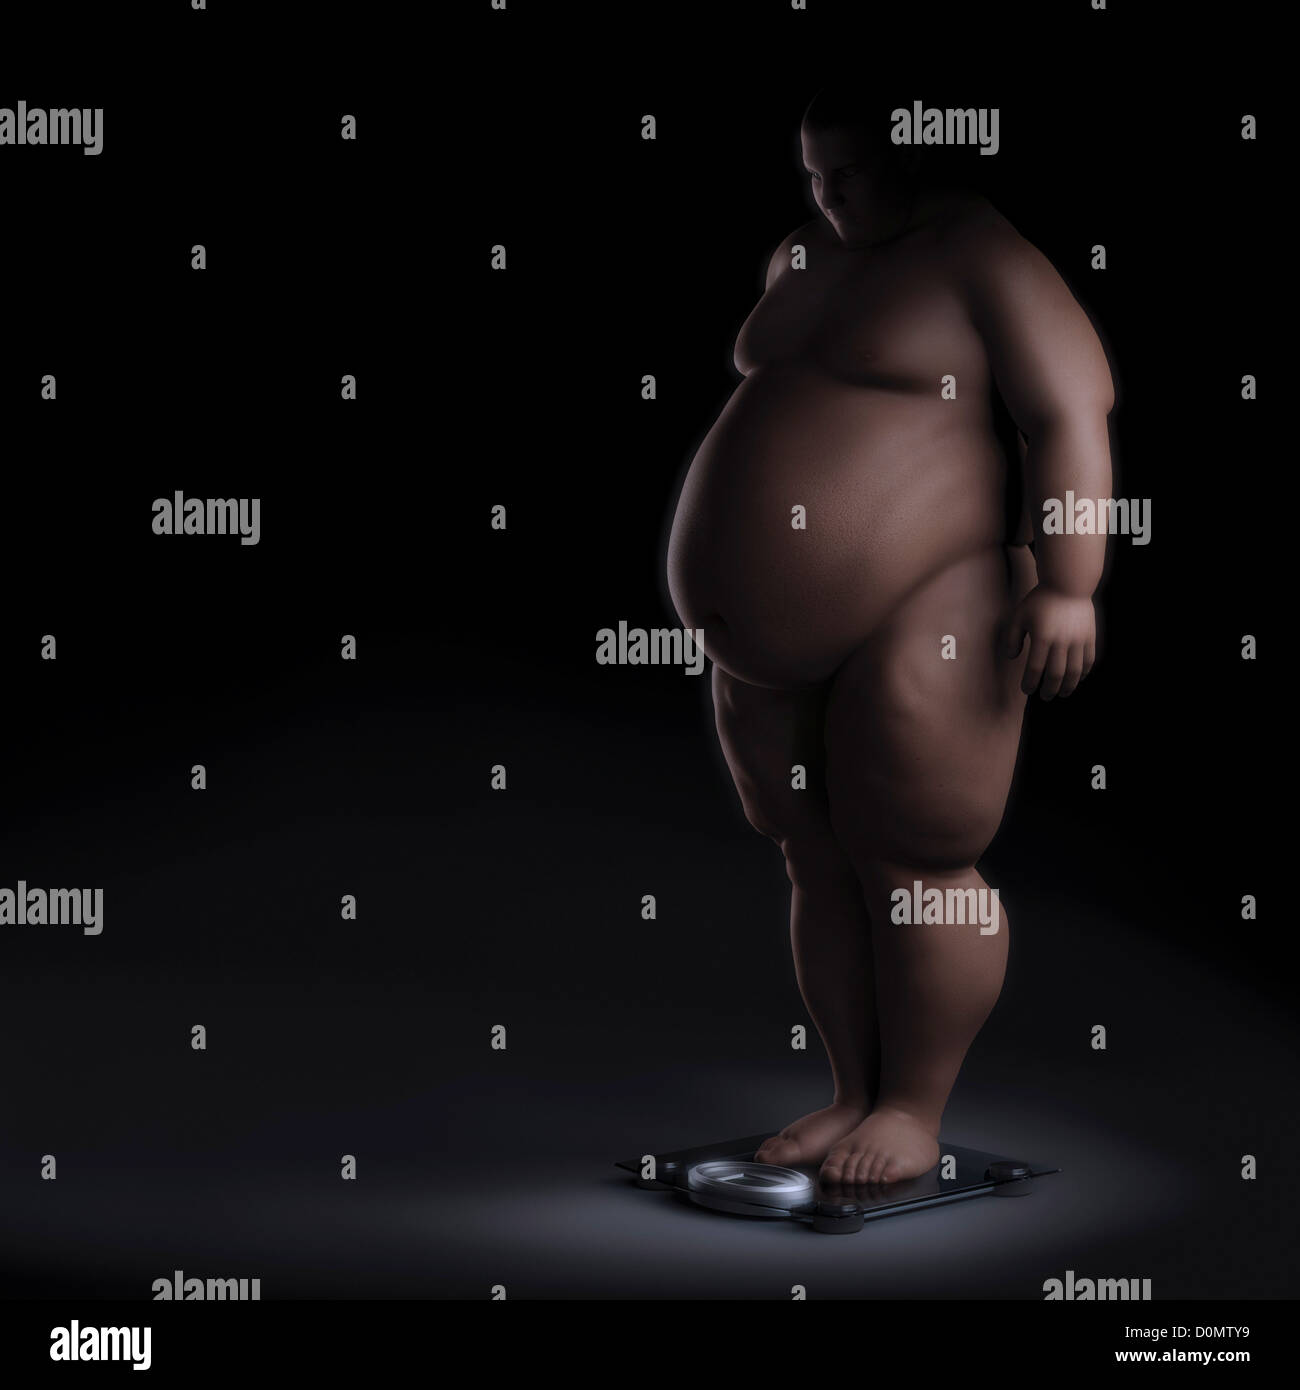 Anatomical model of an obese person standing on scales. Stock Photo